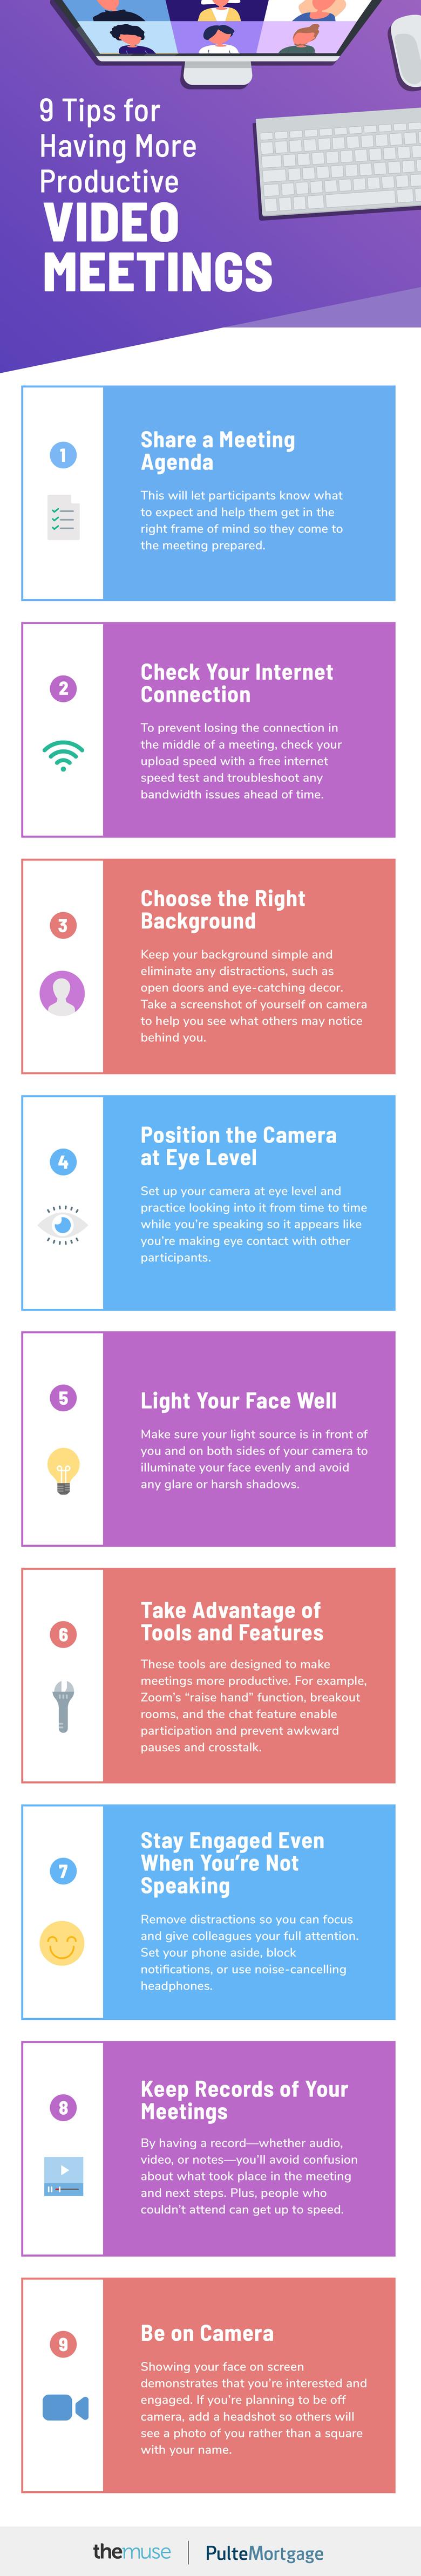 infographic about tips for making video meetings more productive